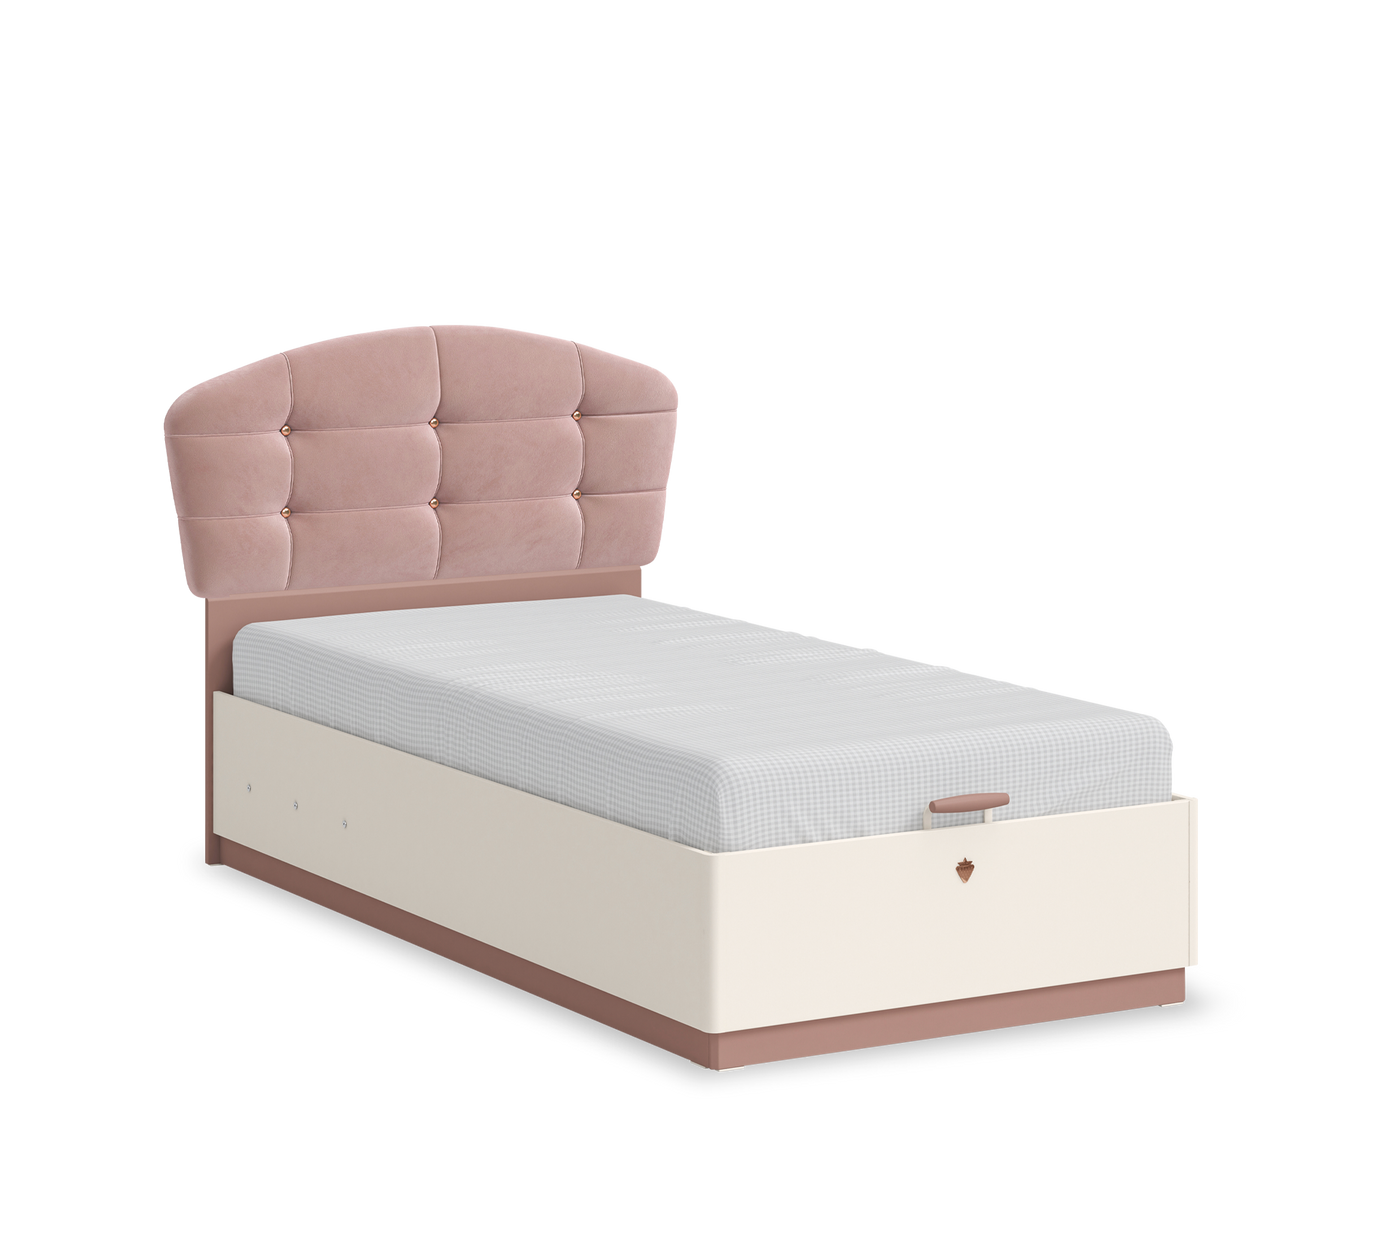 Elegance Headless Bed With Base